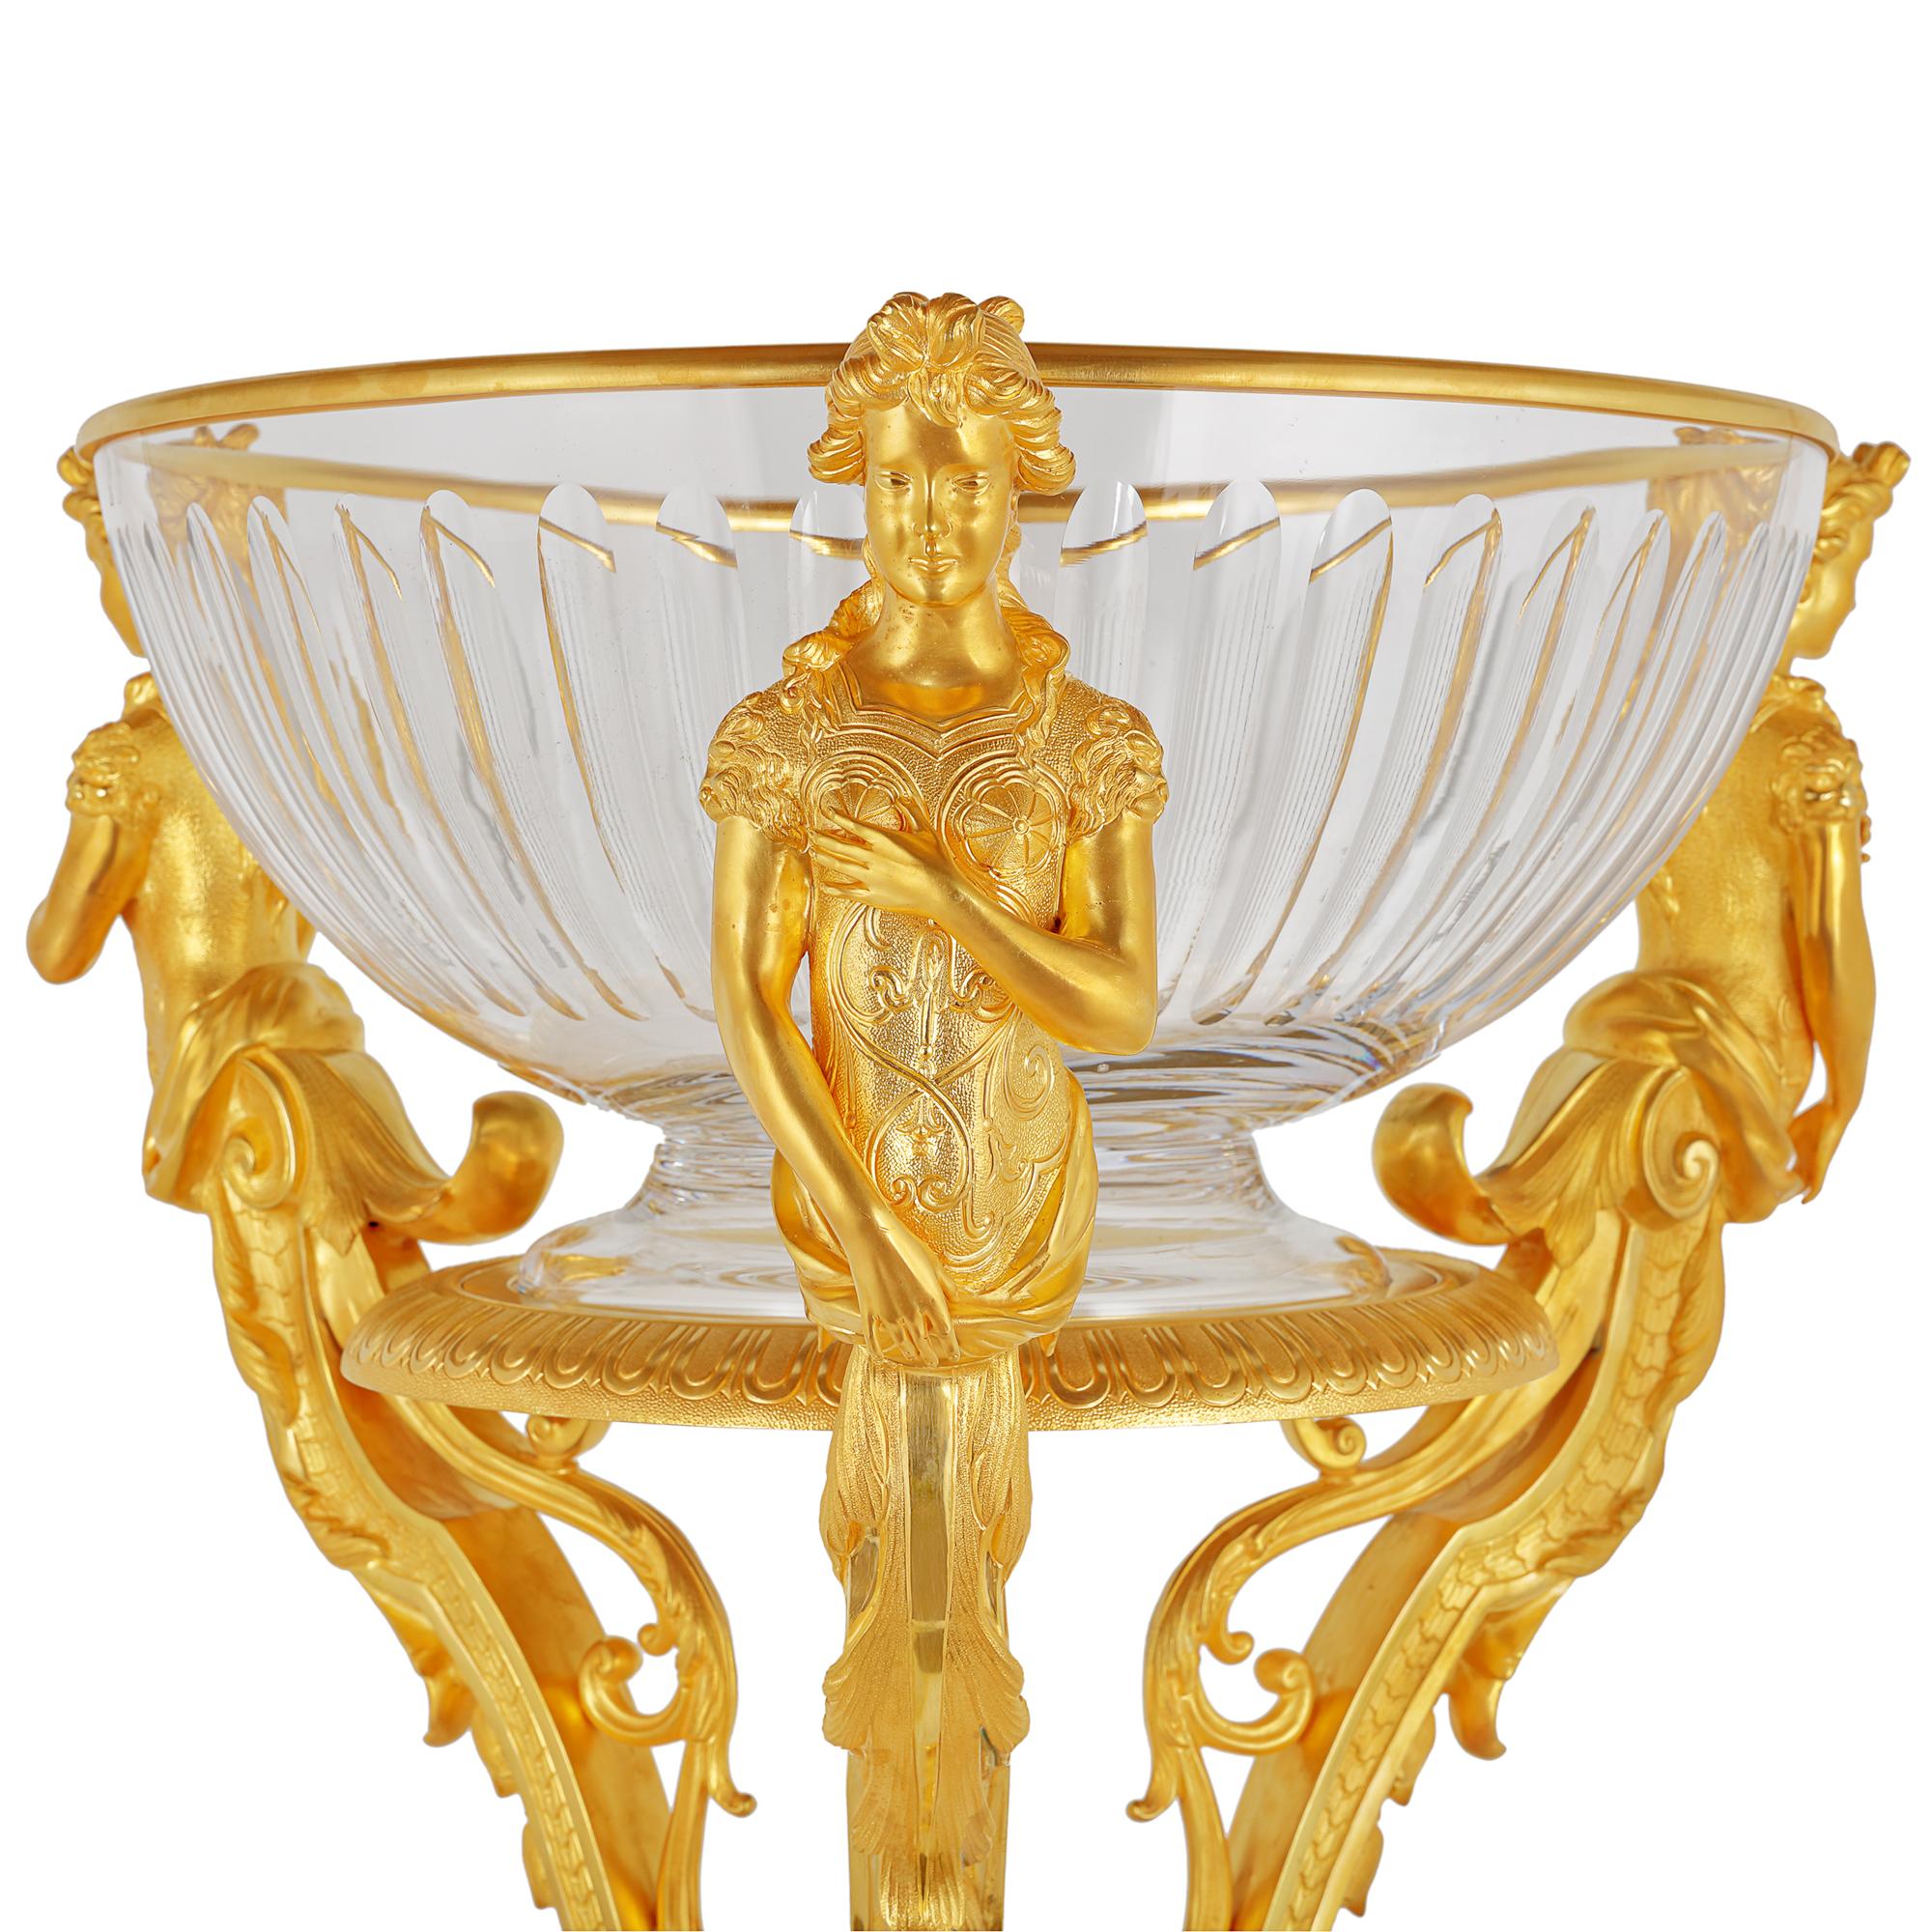 20th Century Pair of French Neoclassical Style Ormolu & Crystal Jardinieres For Sale